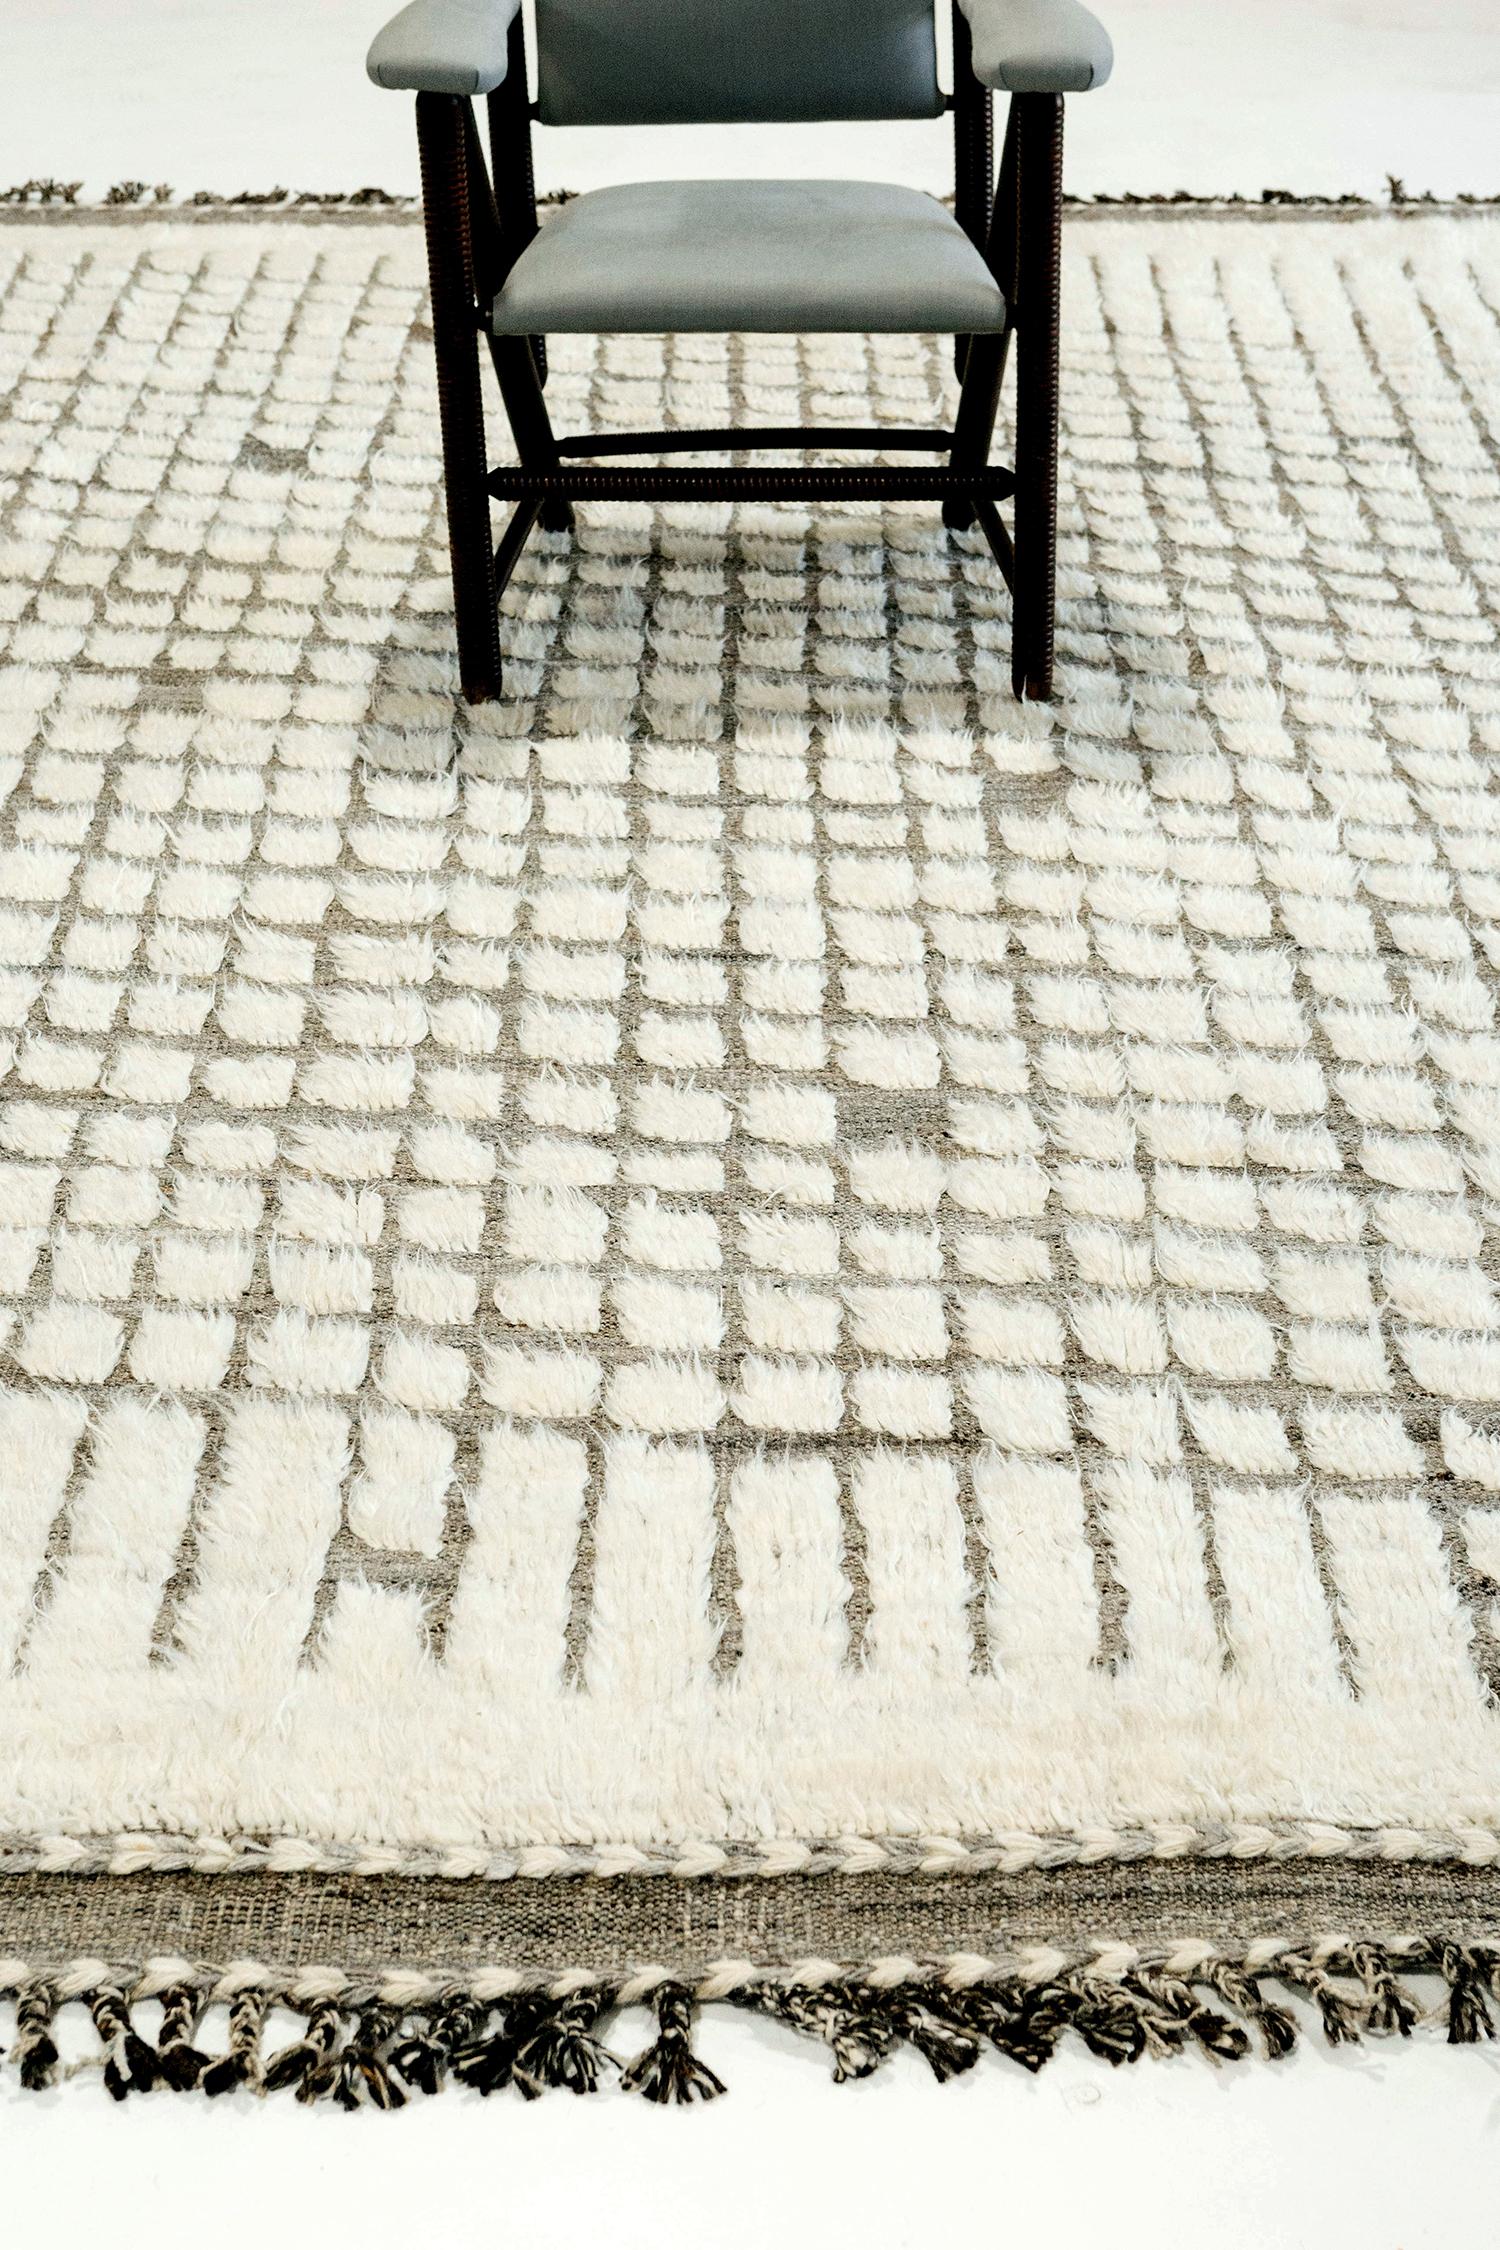 Abisko' is the perfect handwoven rug with embossed detailing in natural gray and ivory in an all-over repeating diagonal pattern. Beautiful tassels and bordered designs add a timely and one of a kind essence. Haute Bohemian Collection: designed in